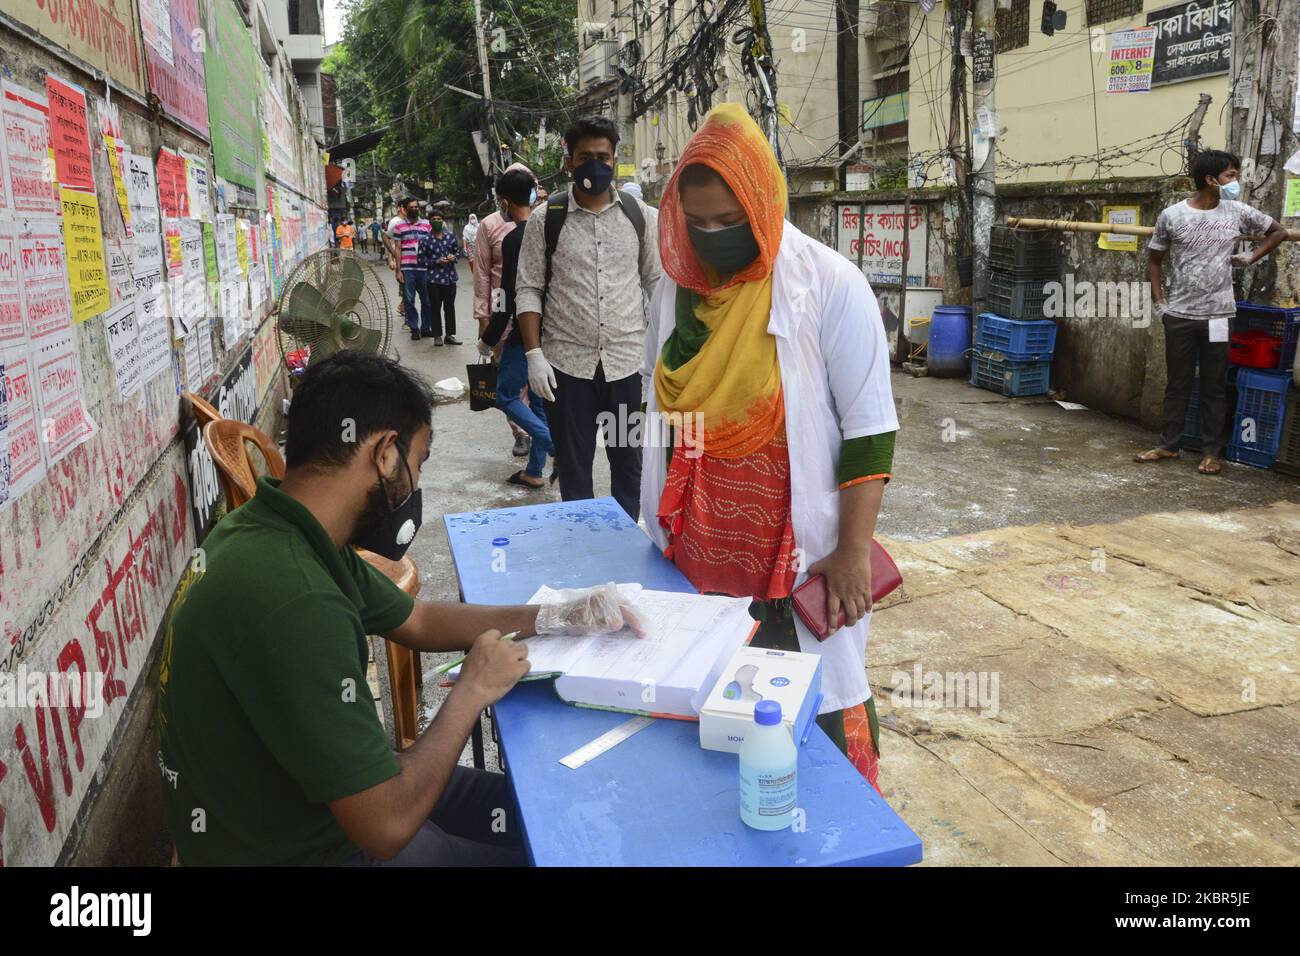 Residents wearing Facemask get out in an emergency after registration from the government imposed coronavirus red zone with maximum infection risk at East Rajabazar in Dhaka, Bangladesh.on June 14, 2020.The authorities put East Rajabazar in Dhaka on total lockdown from June 10, allowing no one to leave or enter the area, after it was declared coronavirus red zone with maximum infection risk. (Photo by Mamunur Rashid/NurPhoto) Stock Photo